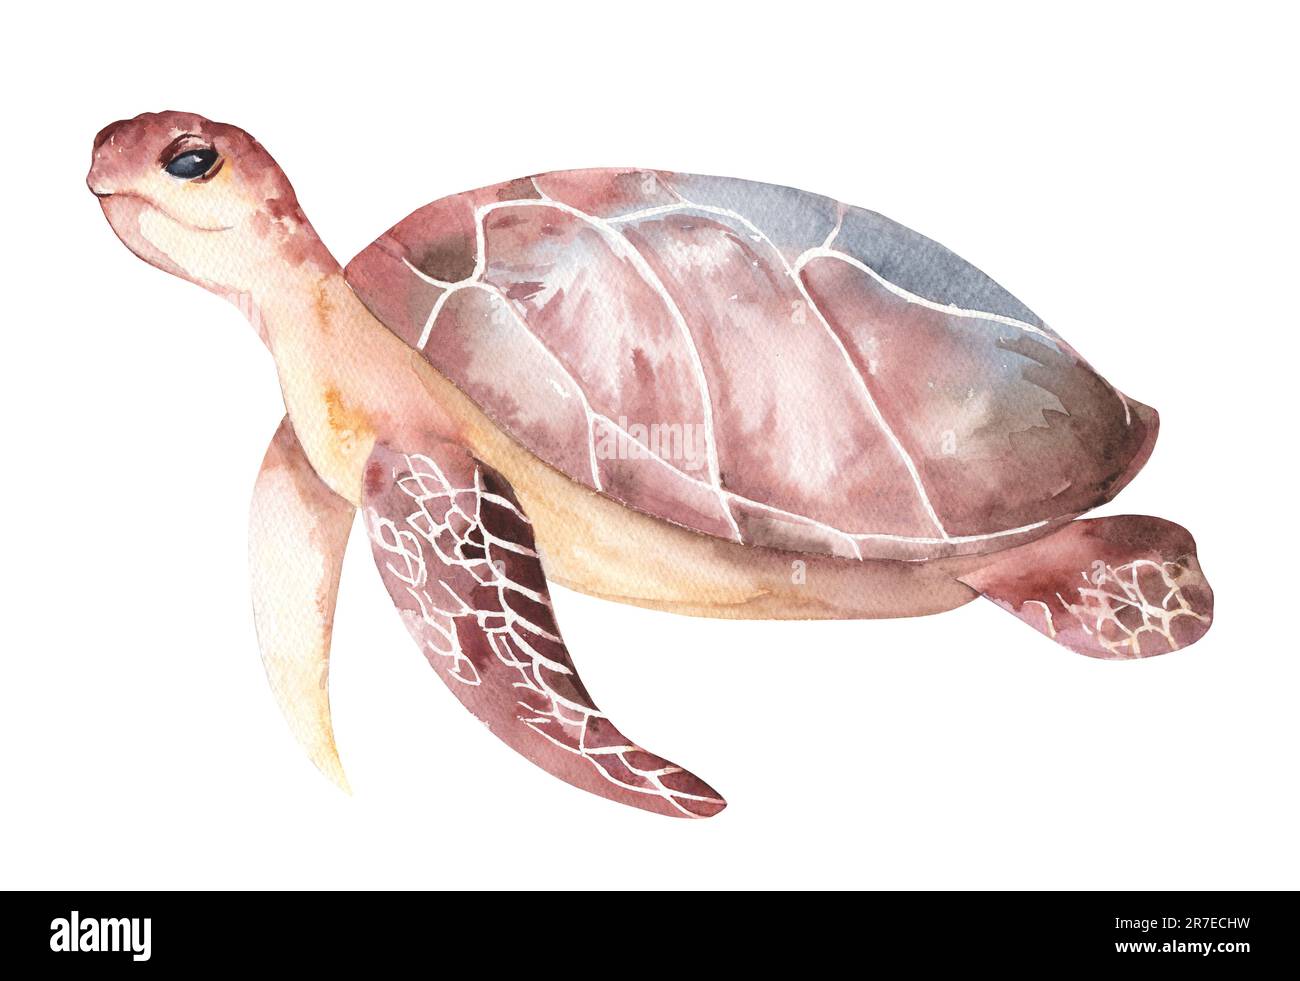 Realistic sea turtle illustration painted in watercolor. Image of sea creatures swimming in the underwater world. Amphibious reptile isolated on white Stock Photo